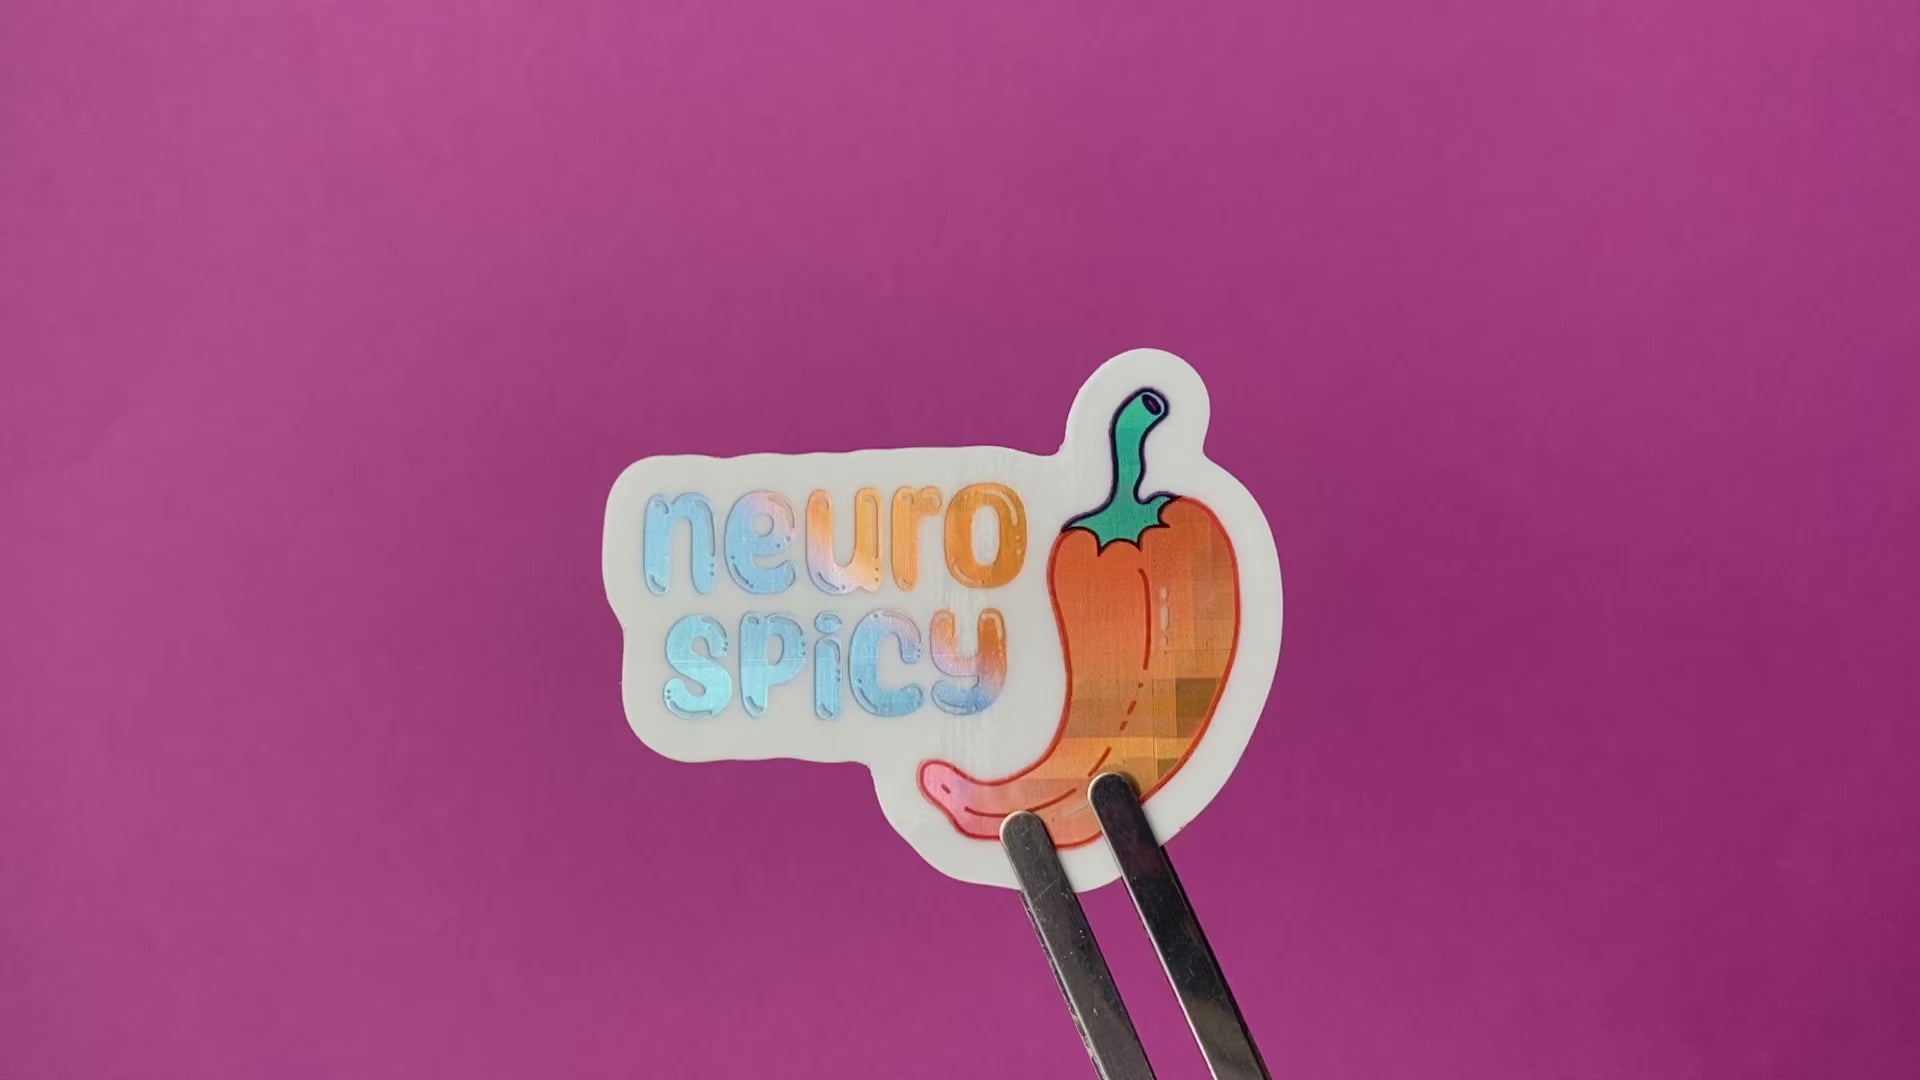 A clip holding a holographic vinyl sticker with an illustration of a pepper and the words "neuro spicy". The holographic material is a blue to purple to orange gradient pattern with a plaid effect. The sticker rotates to show the holographic effect in different light.